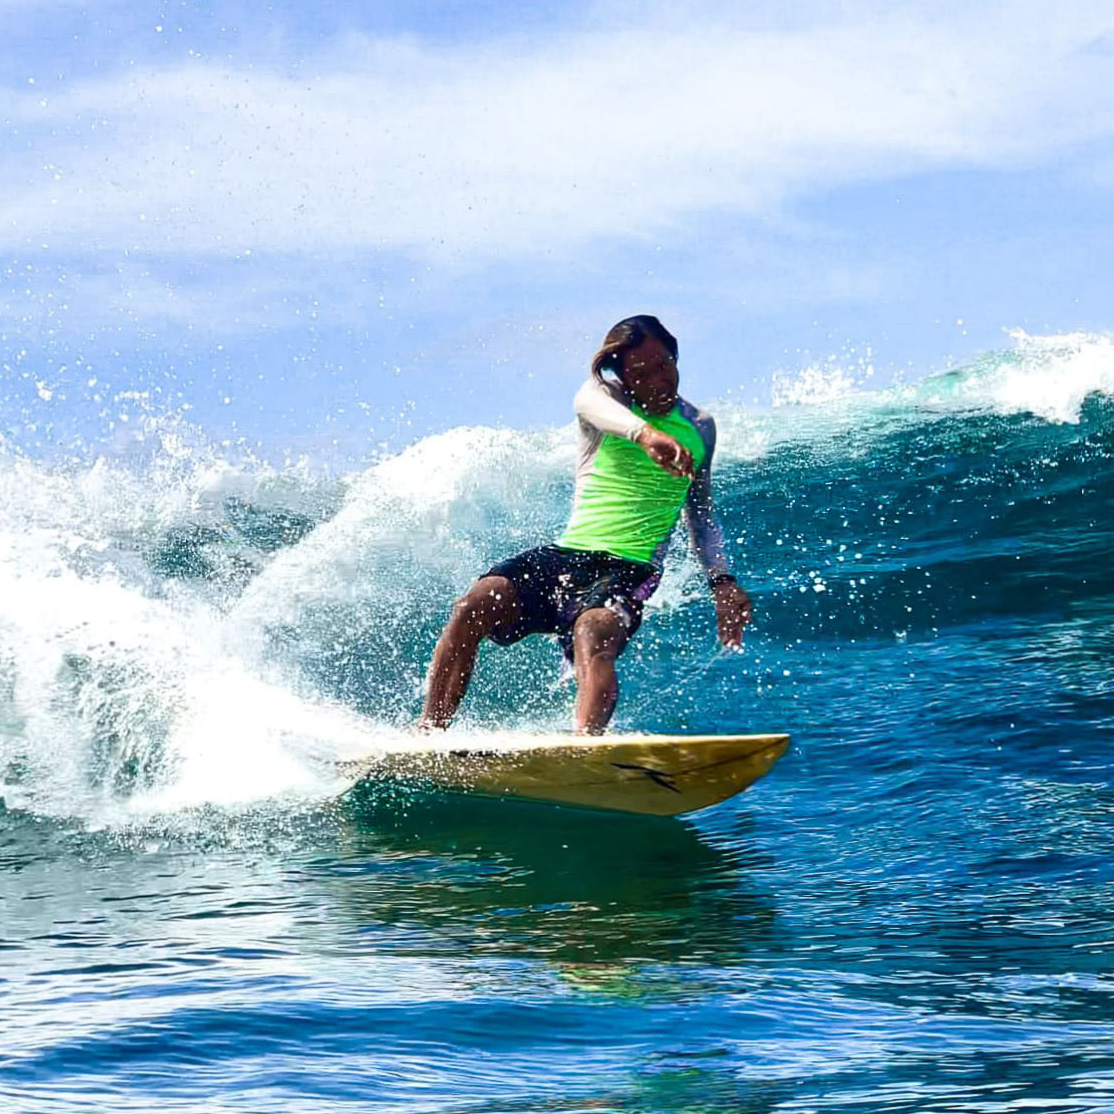 Photo of Jery, an instructor at Padang Padang Surf Camp surfing.